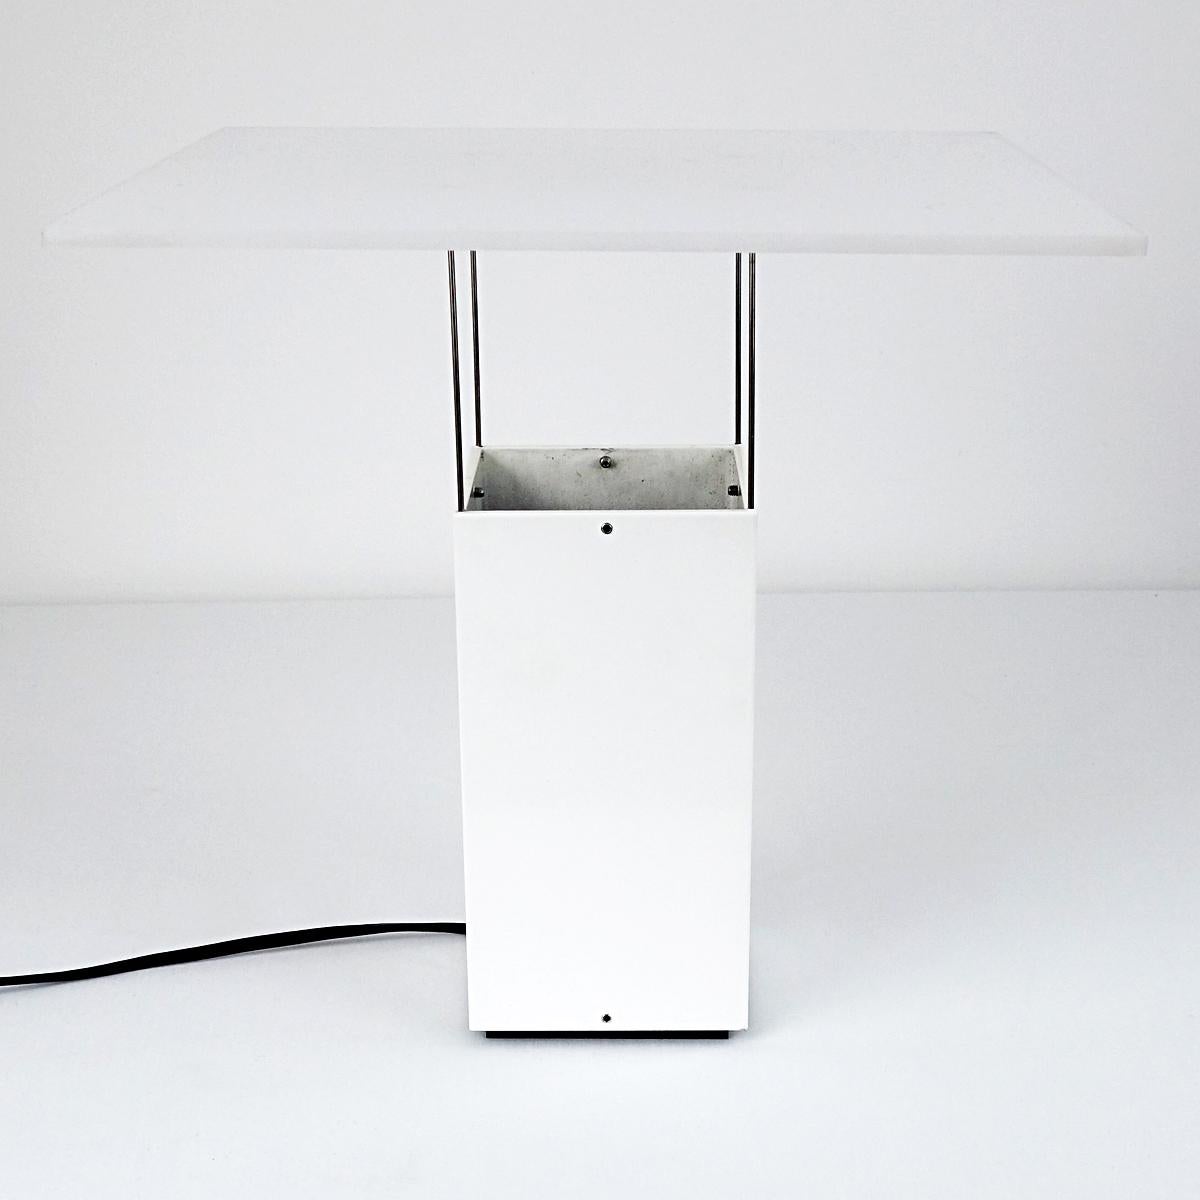 This elegant table lamp has a solid base above which a panel seems to float.
The panel, like the base made of white plexiglass, is carried by four very thin metal sticks.
The lamp is attributed to Dutch designer Benno Premsela for two reasons. The